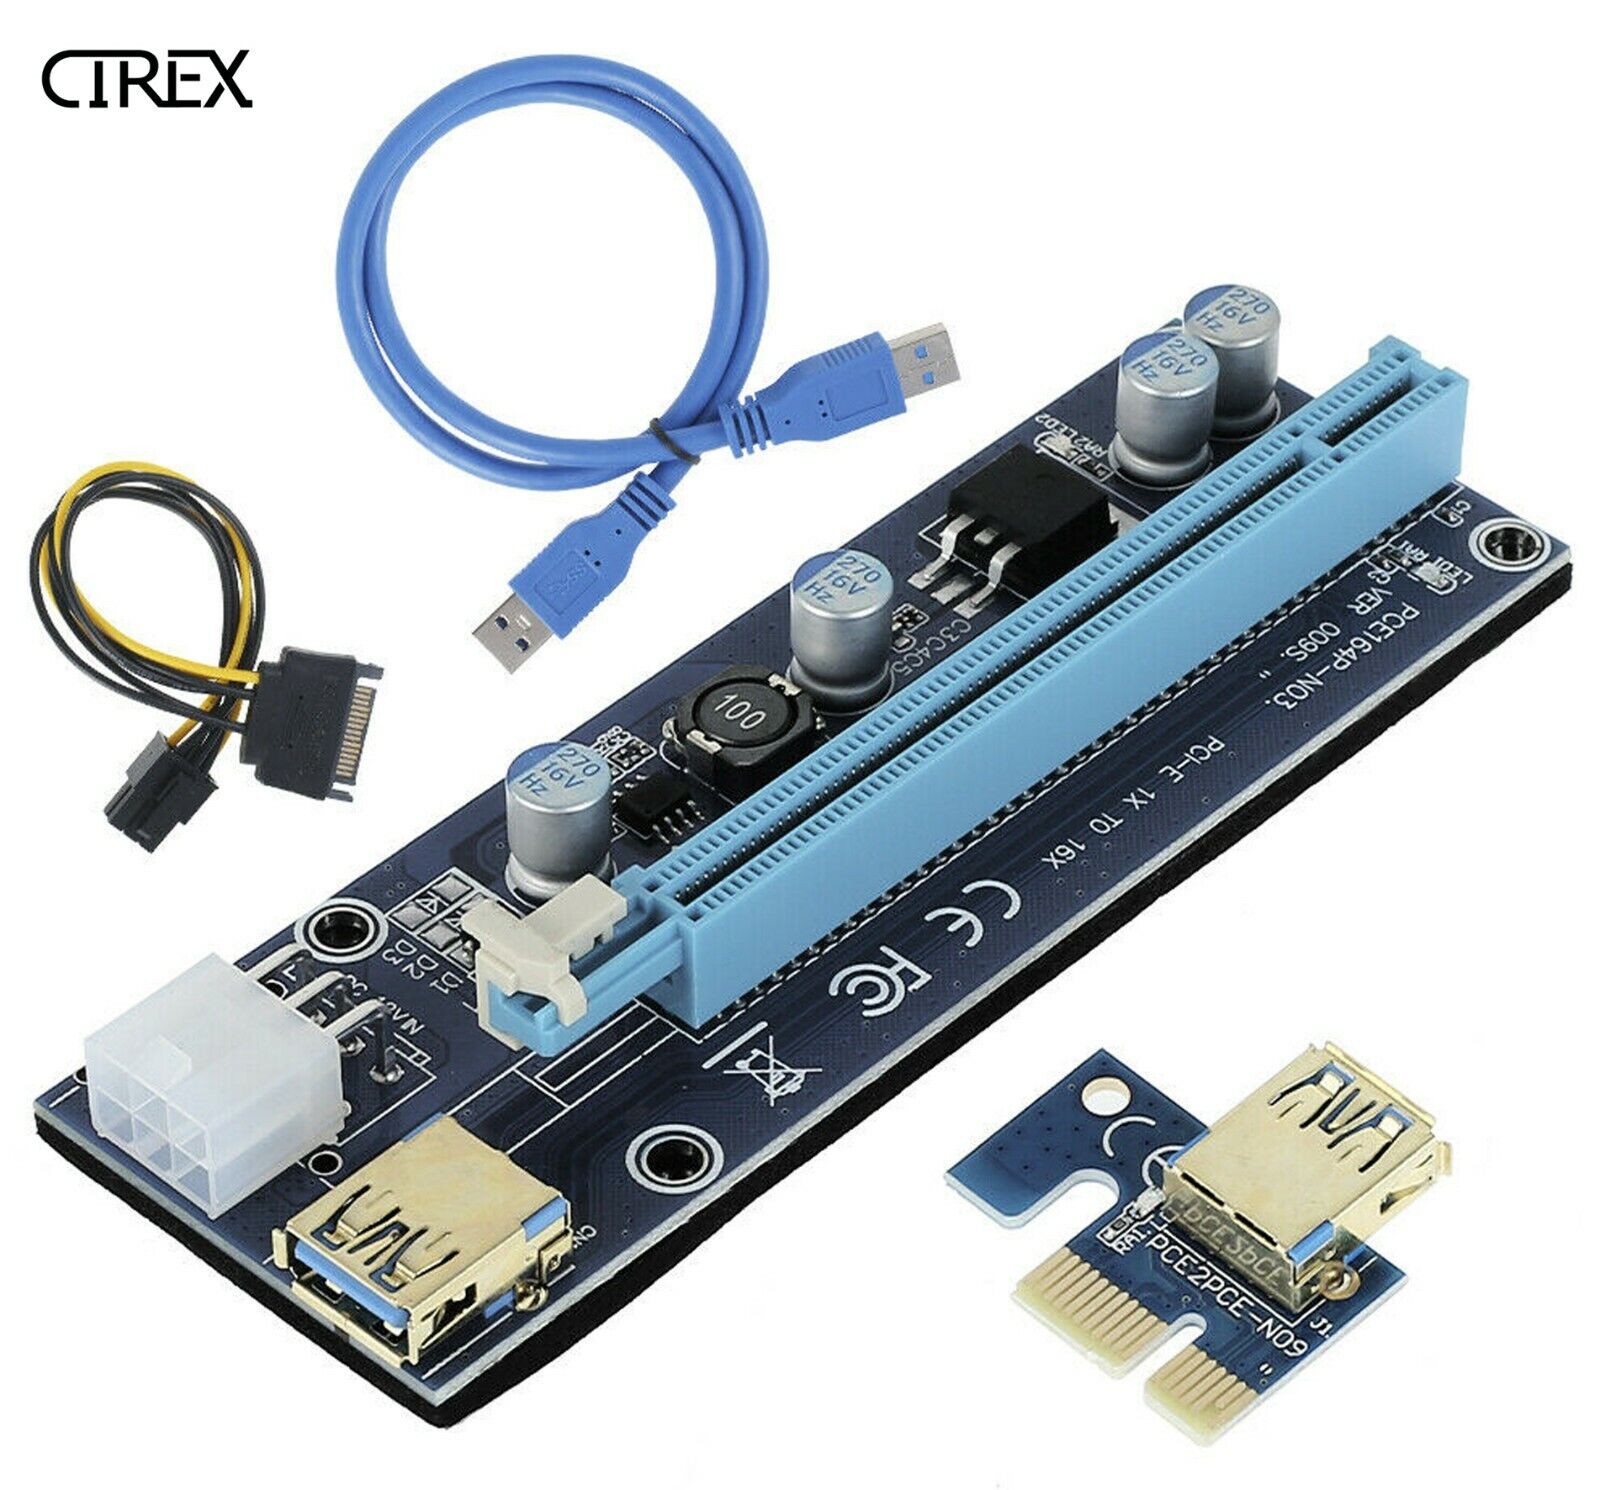 PCI-E Express 1x to16x Extender Riser Adapter for PCIe Graphics Card GPU Mining